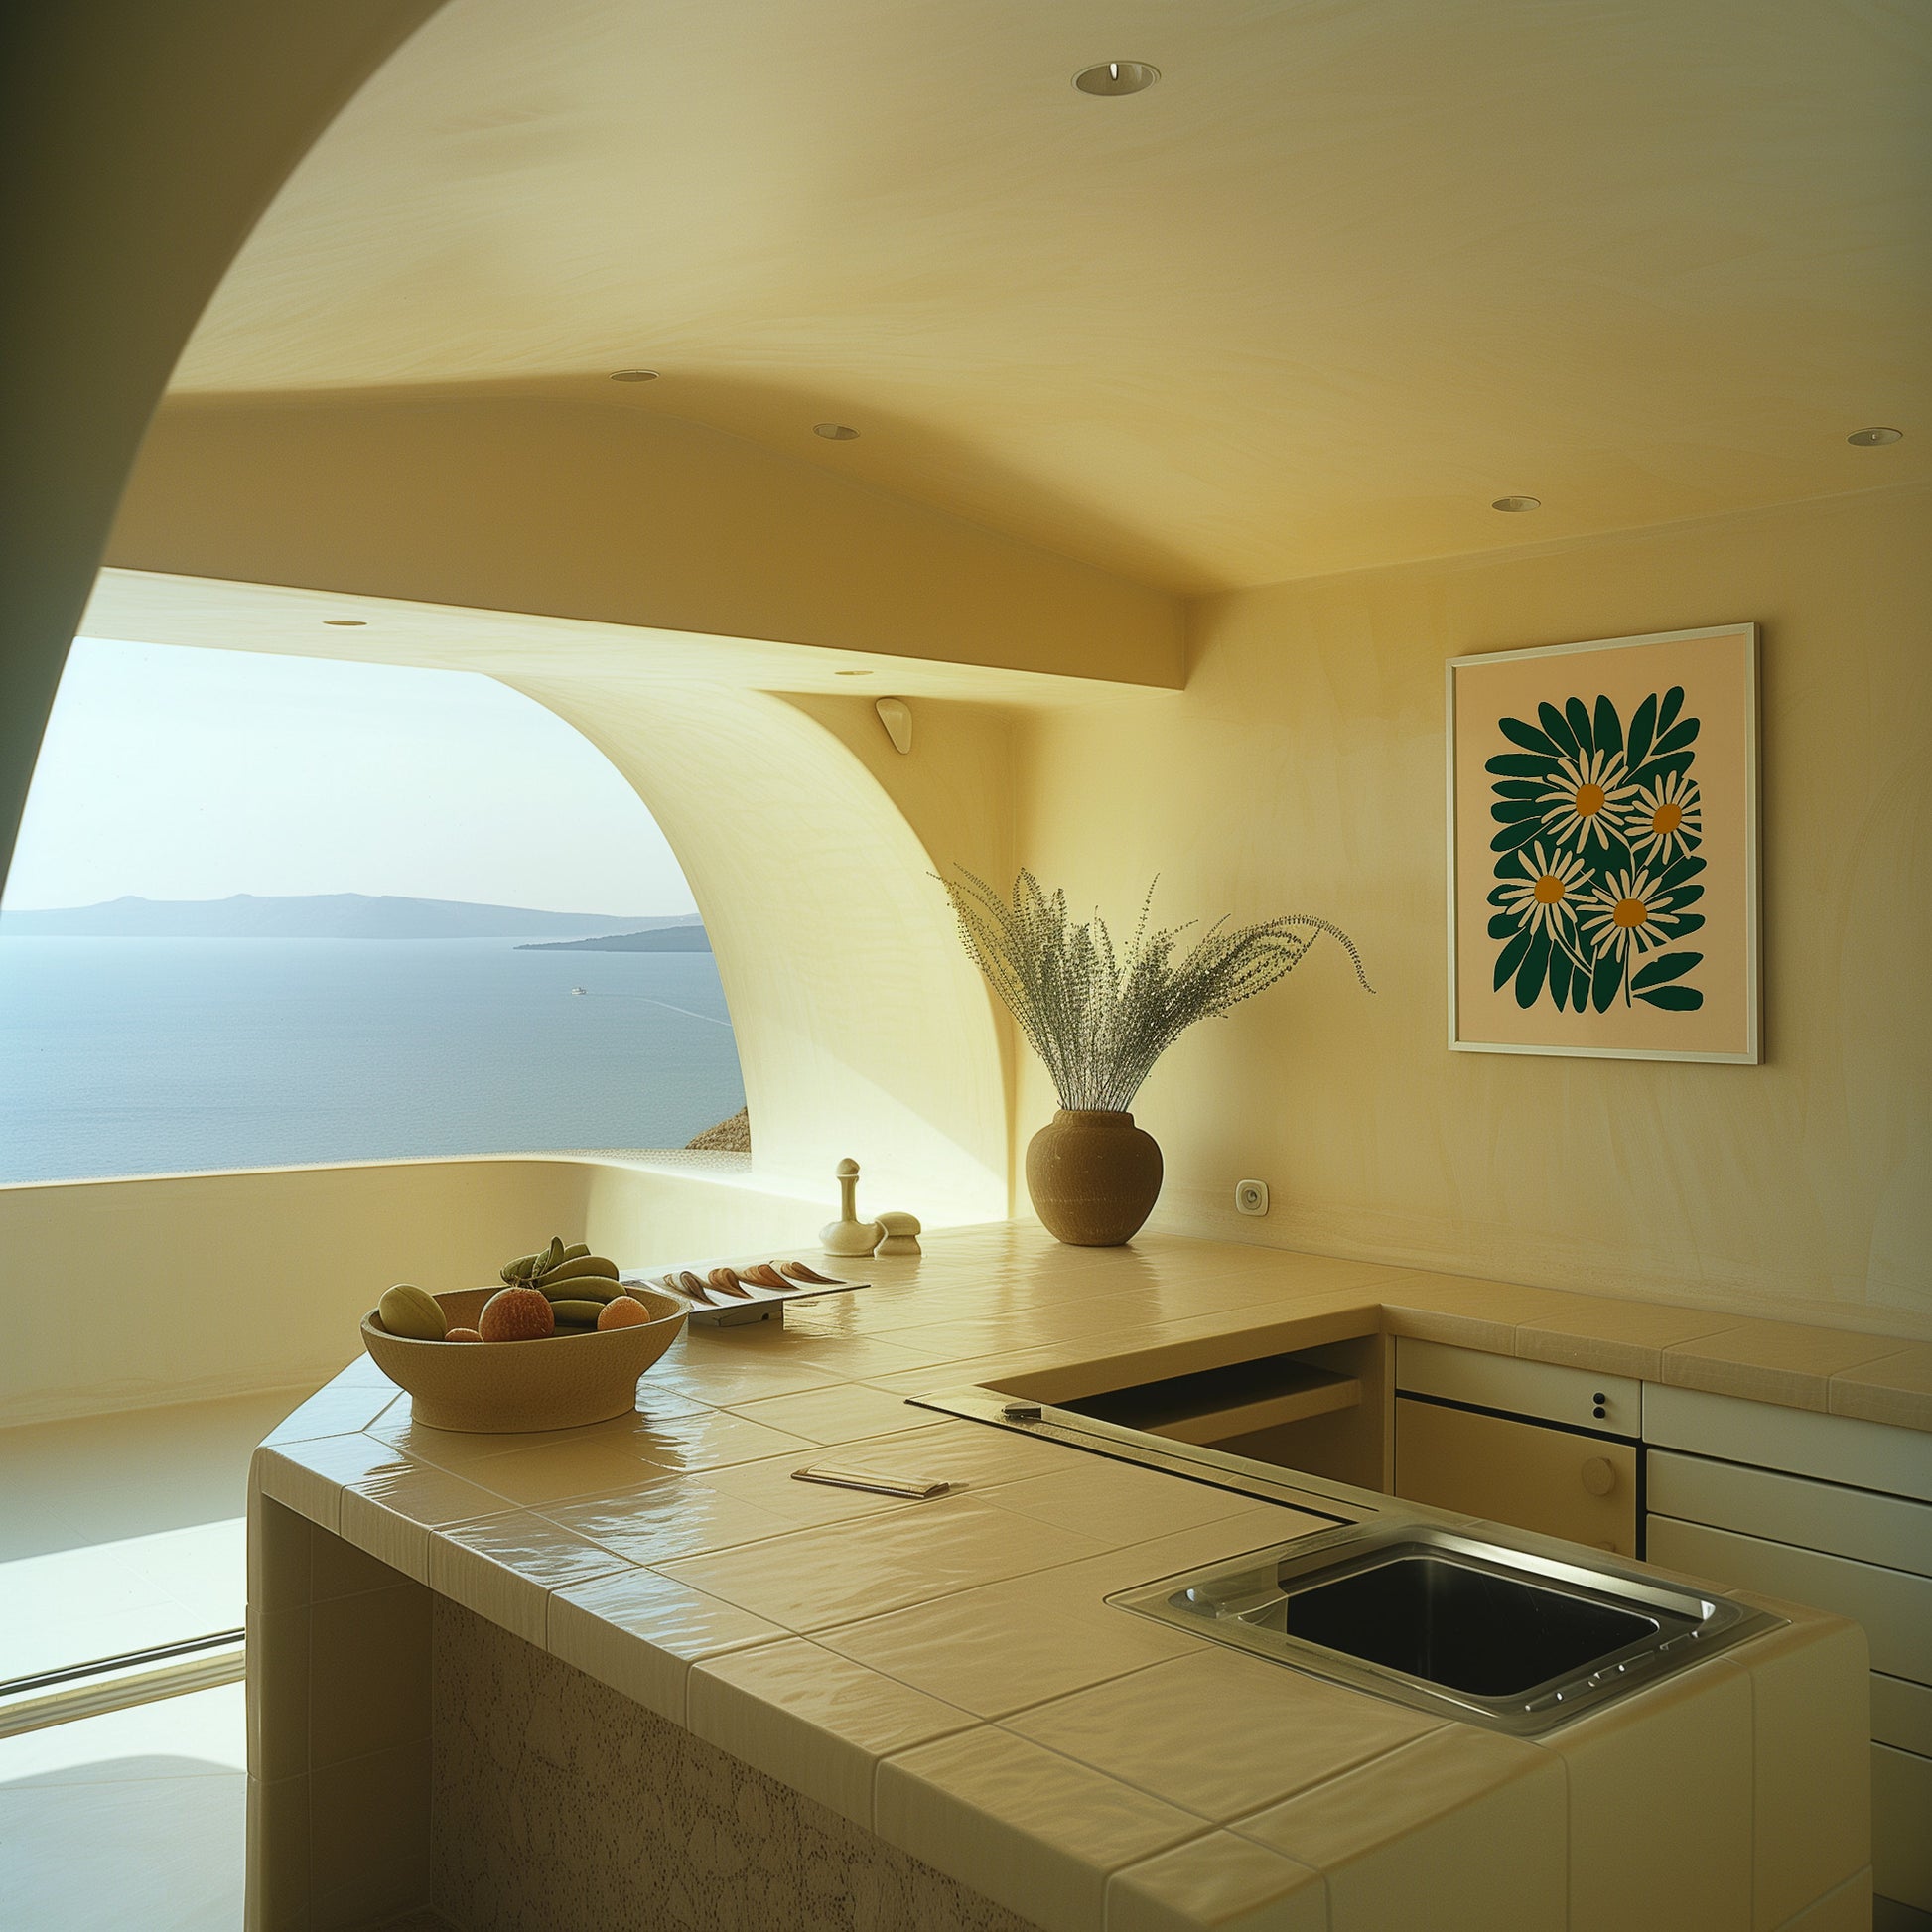 Modern kitchen interior with ocean view and natural light.